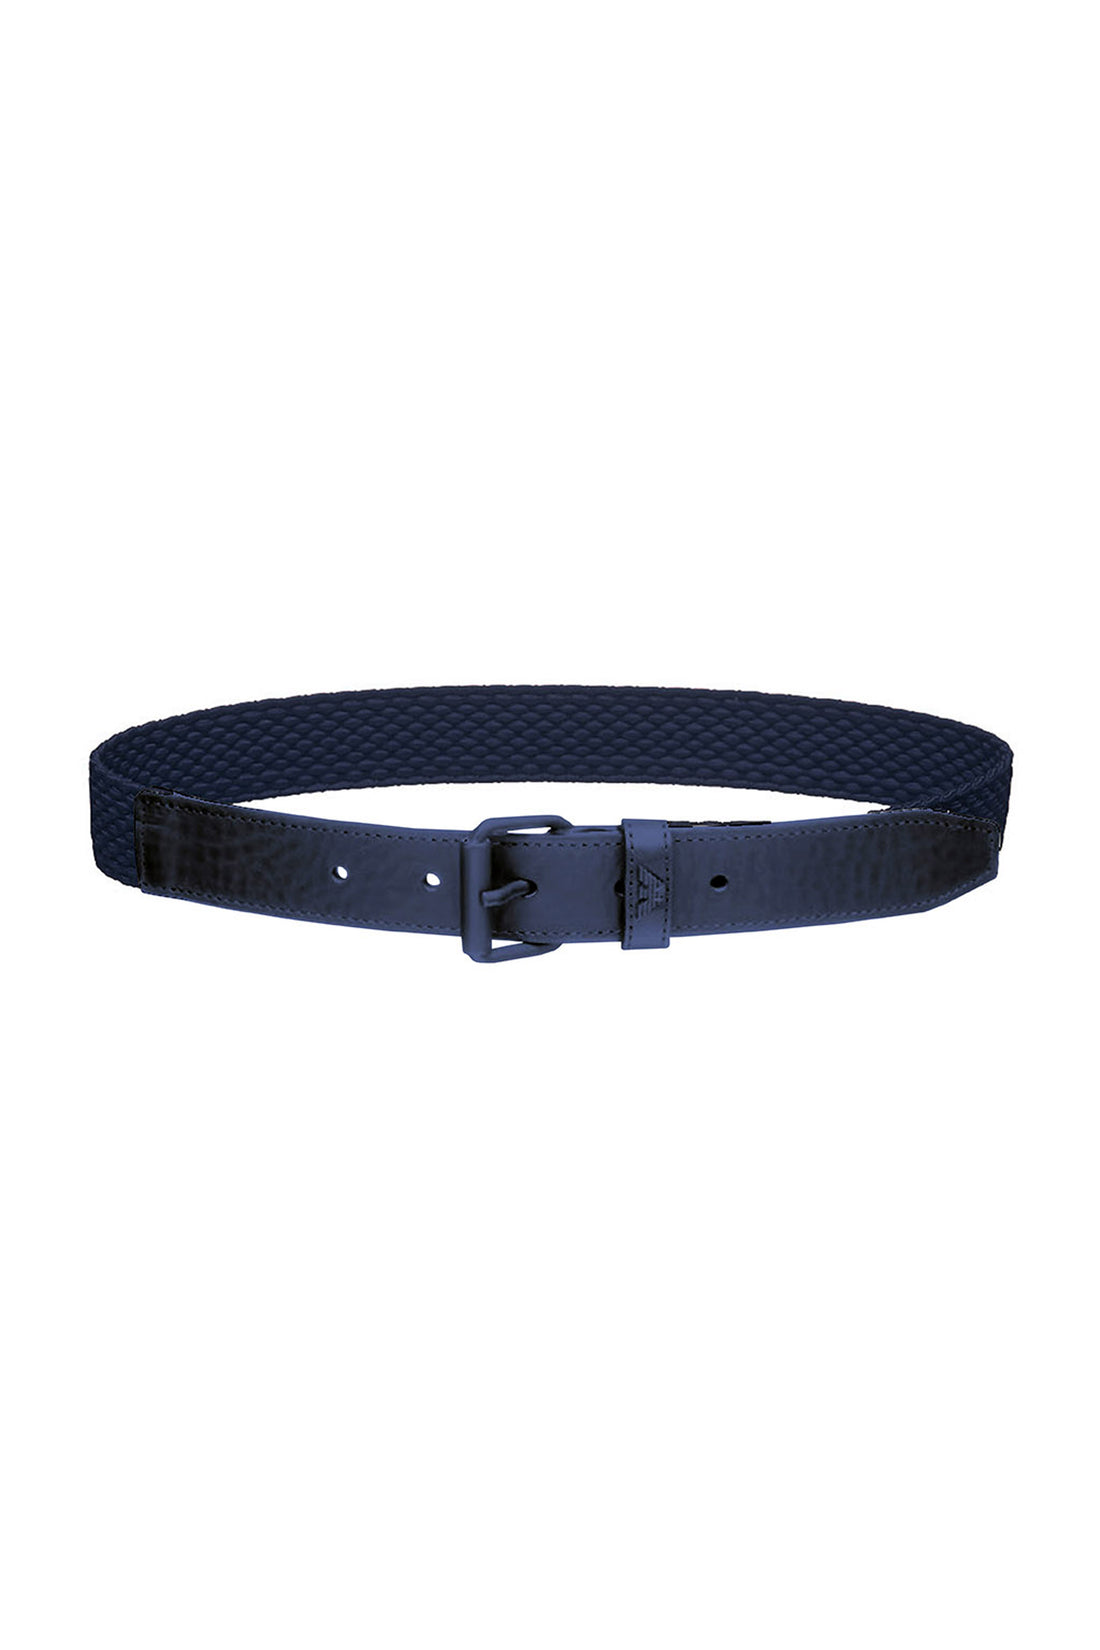 Emporio Armani Twisted Belt With Buckle